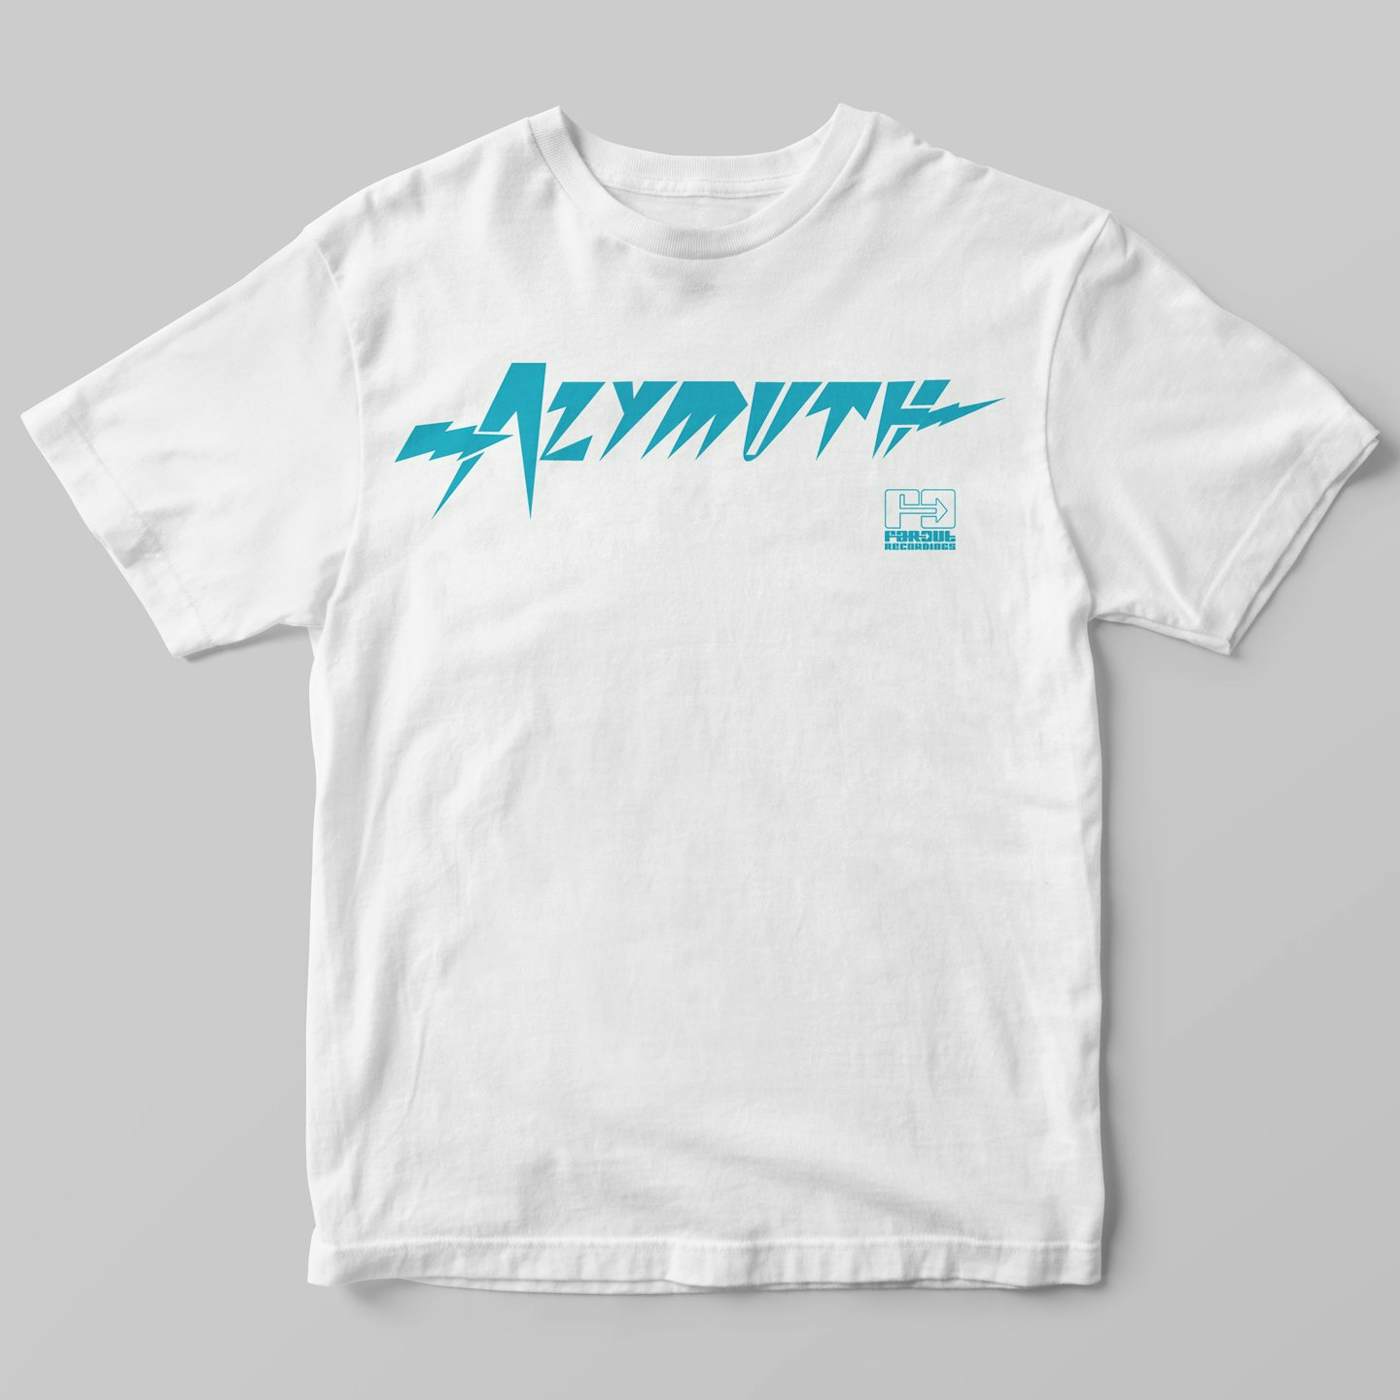 Azymuth T-shirt (SOLD OUT)